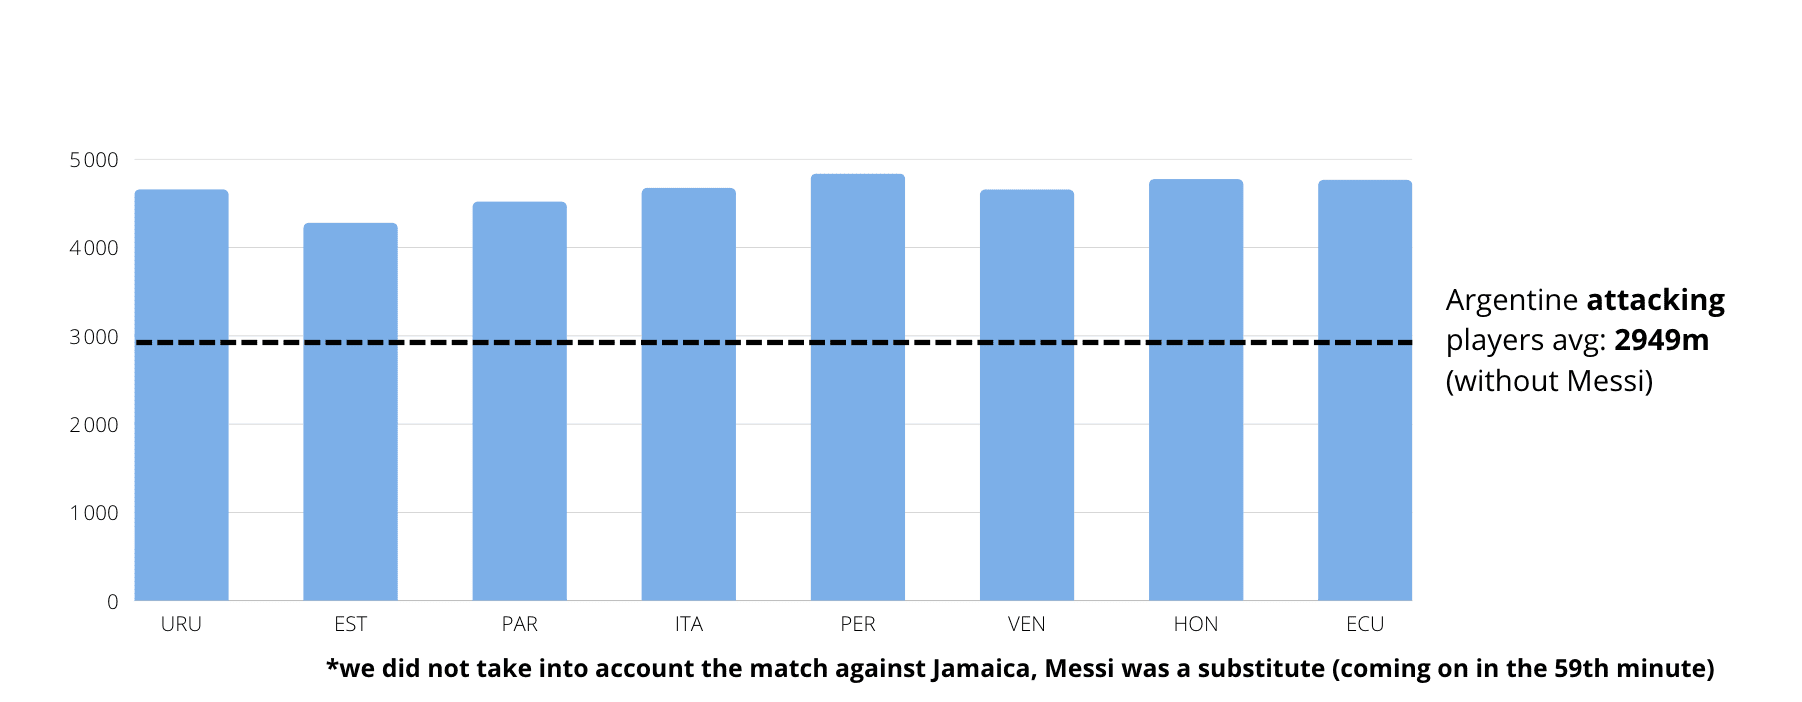 Messi’s distance at low intensity per match (in meters)